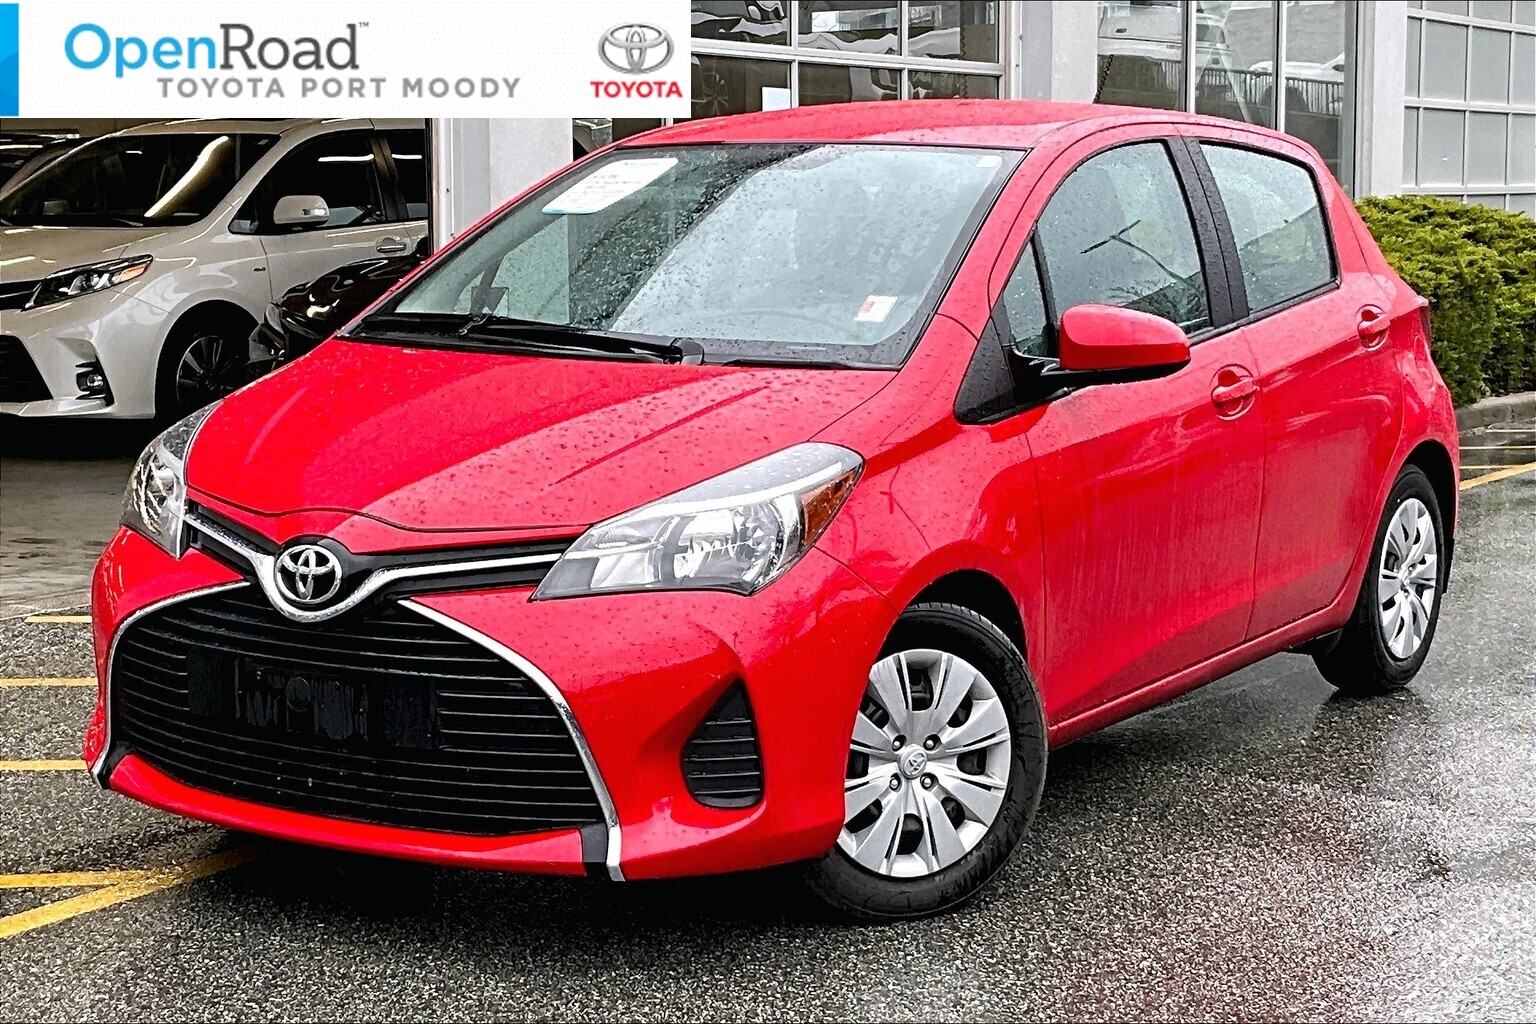 2015 Toyota Yaris 5 Dr LE Htbk 4A |OpenRoad True Price |Local |One O